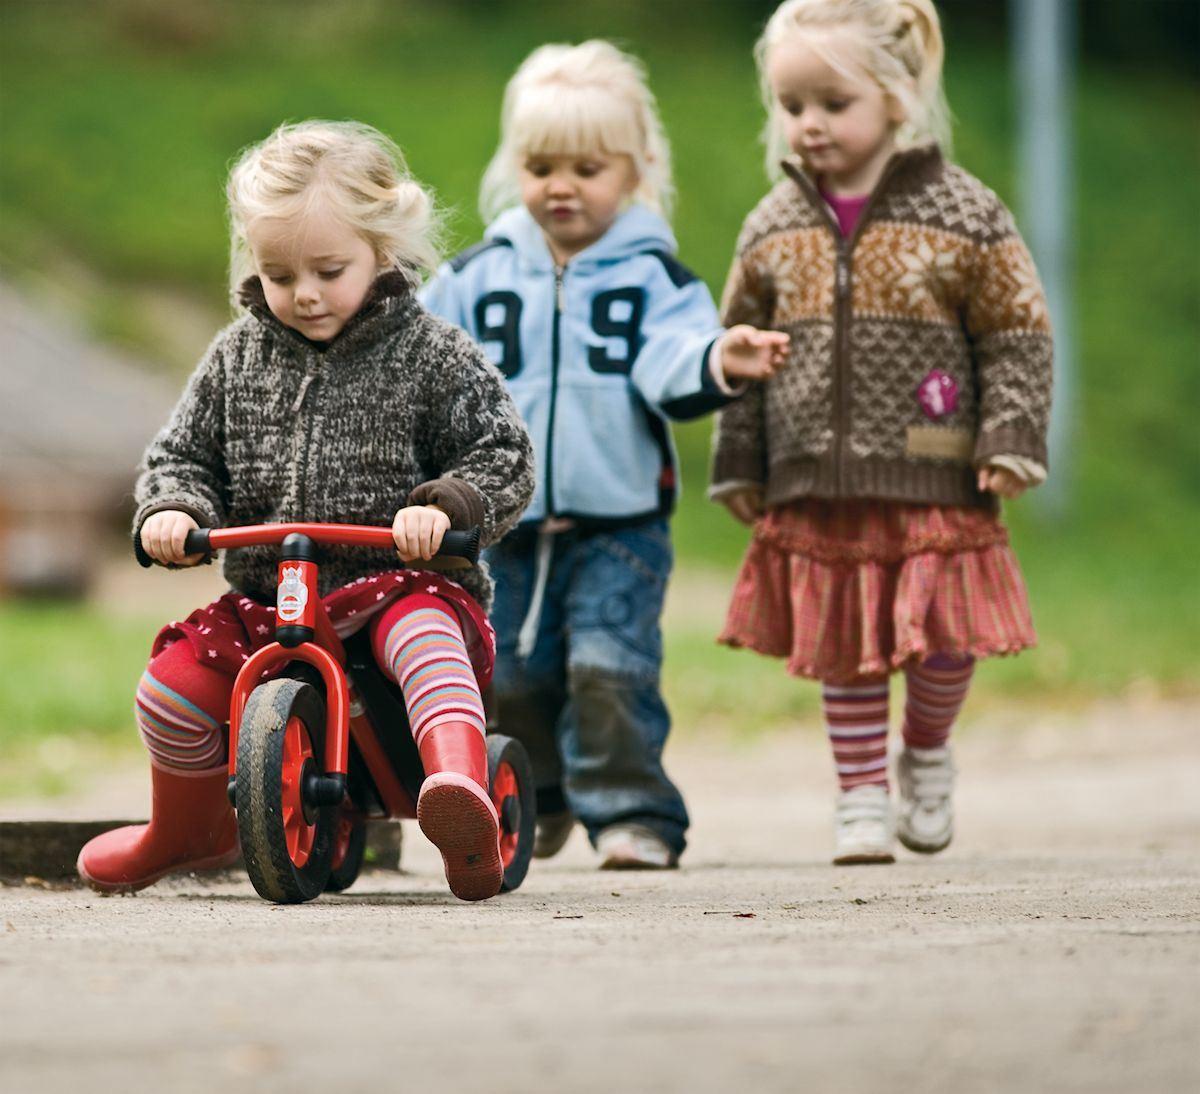 MINI Scooter in Aktion - Serie MINI Winther Viking (1-4 Jahre)